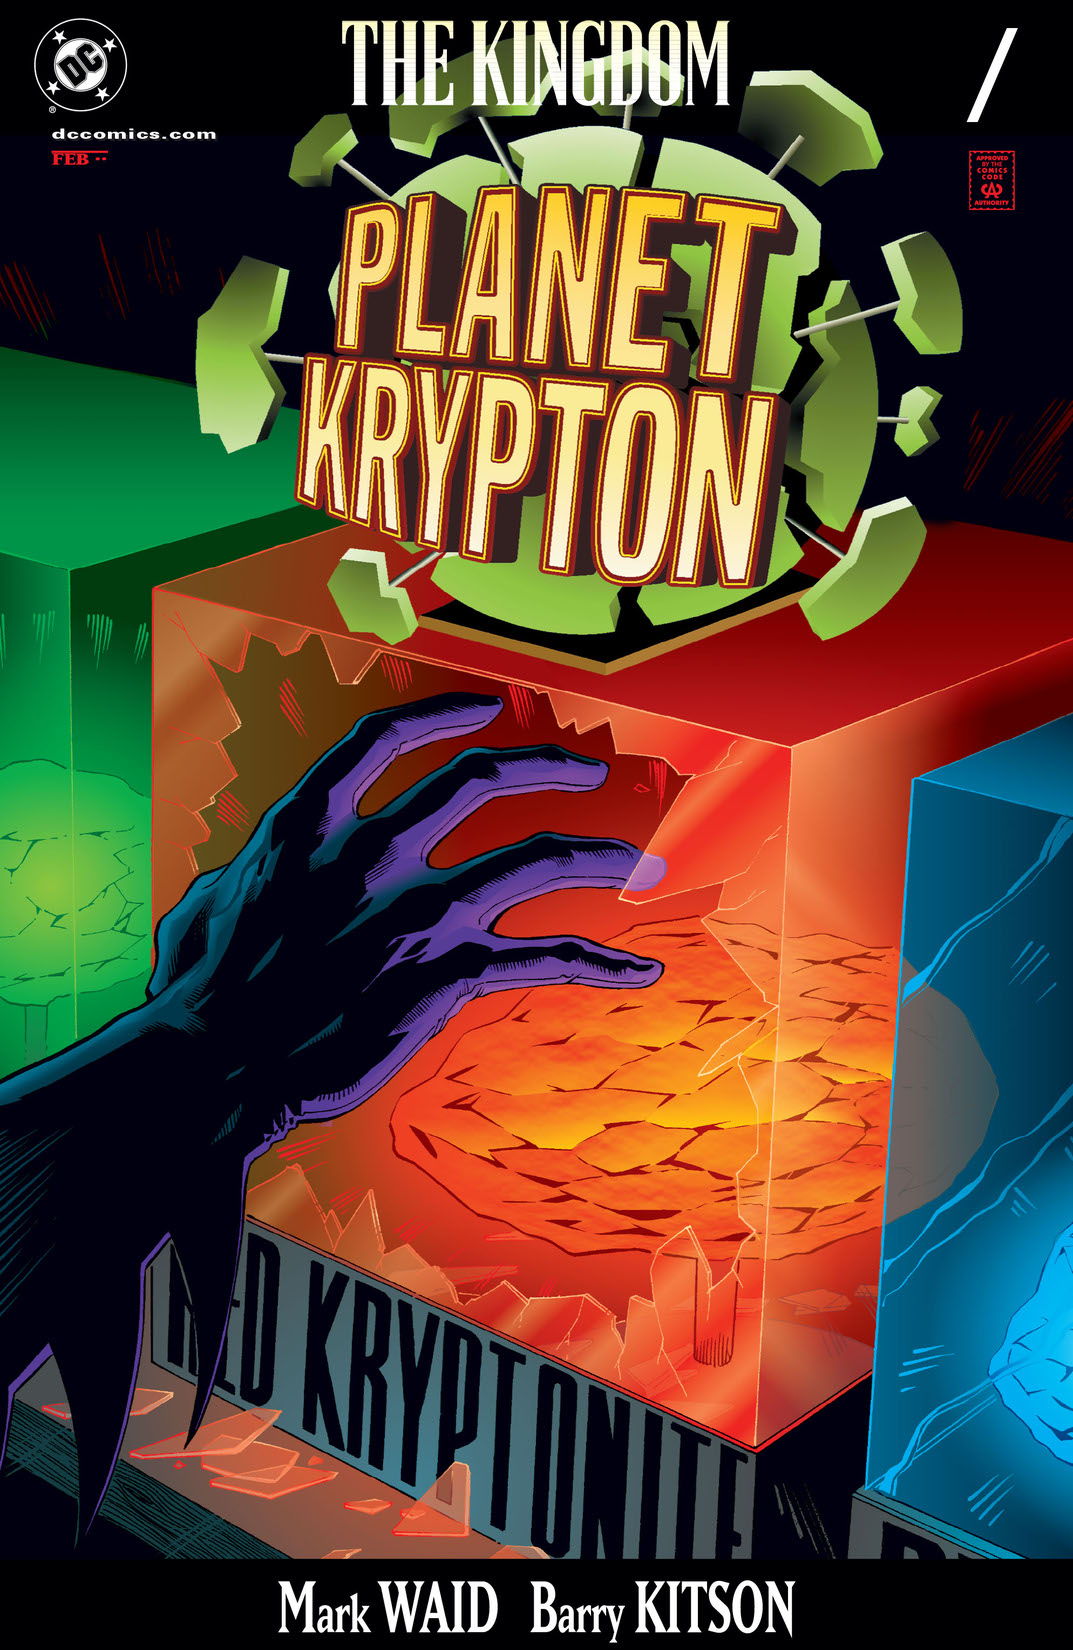 The Kingdom: Planet Krypton #1 preview images